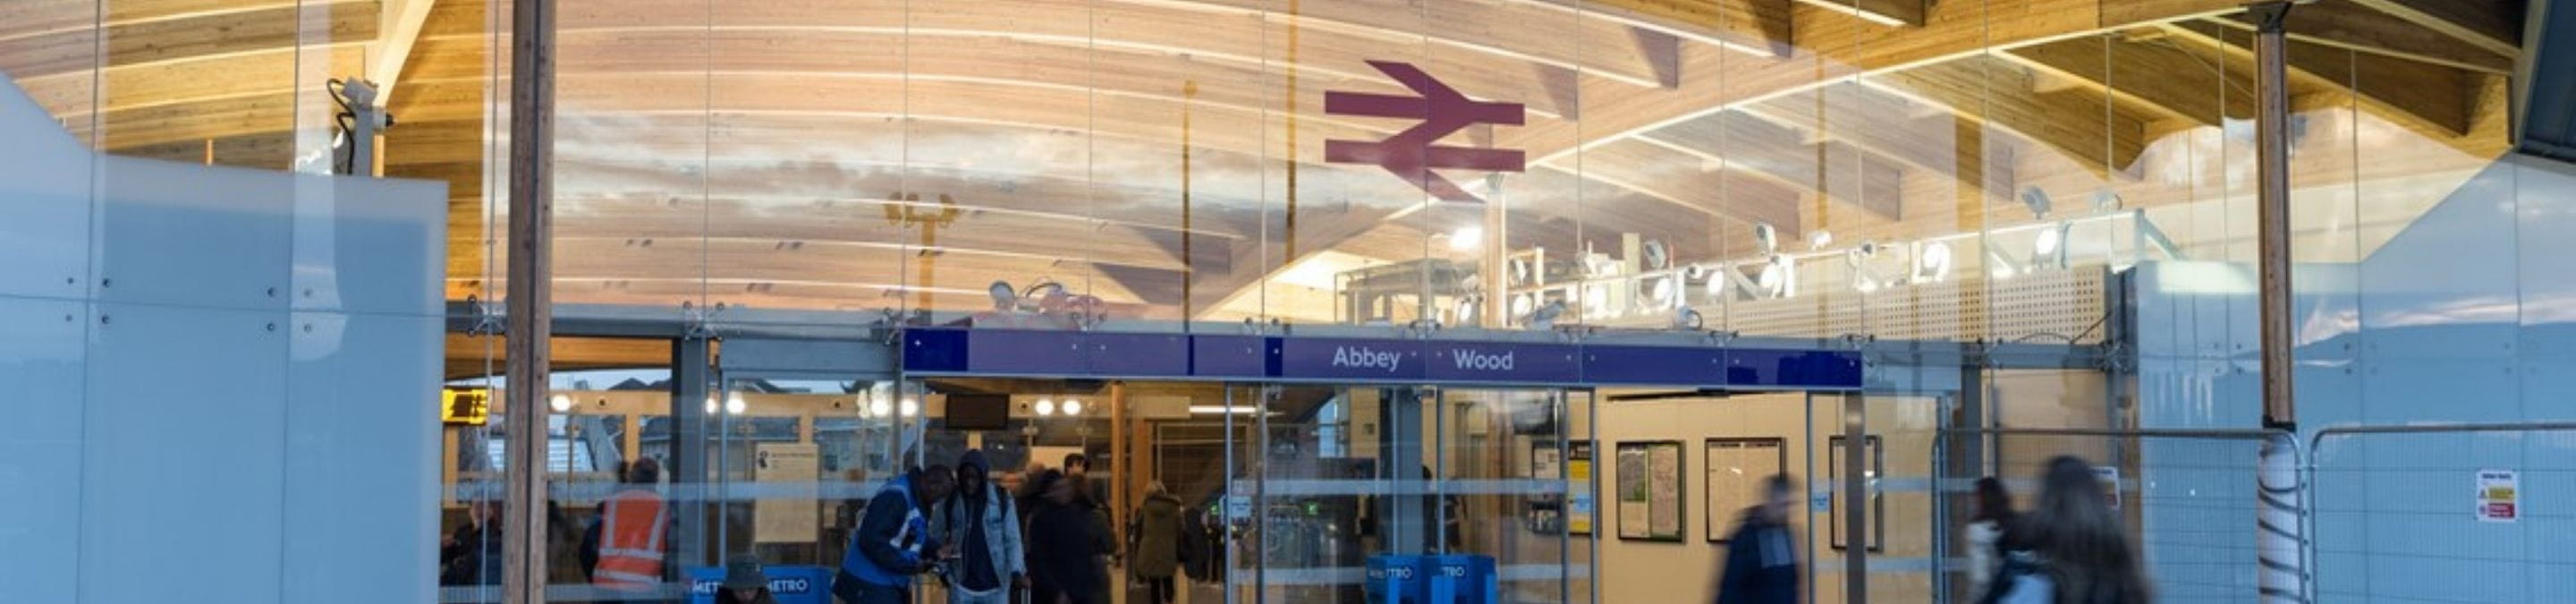 the entrance of Abbey Wood station